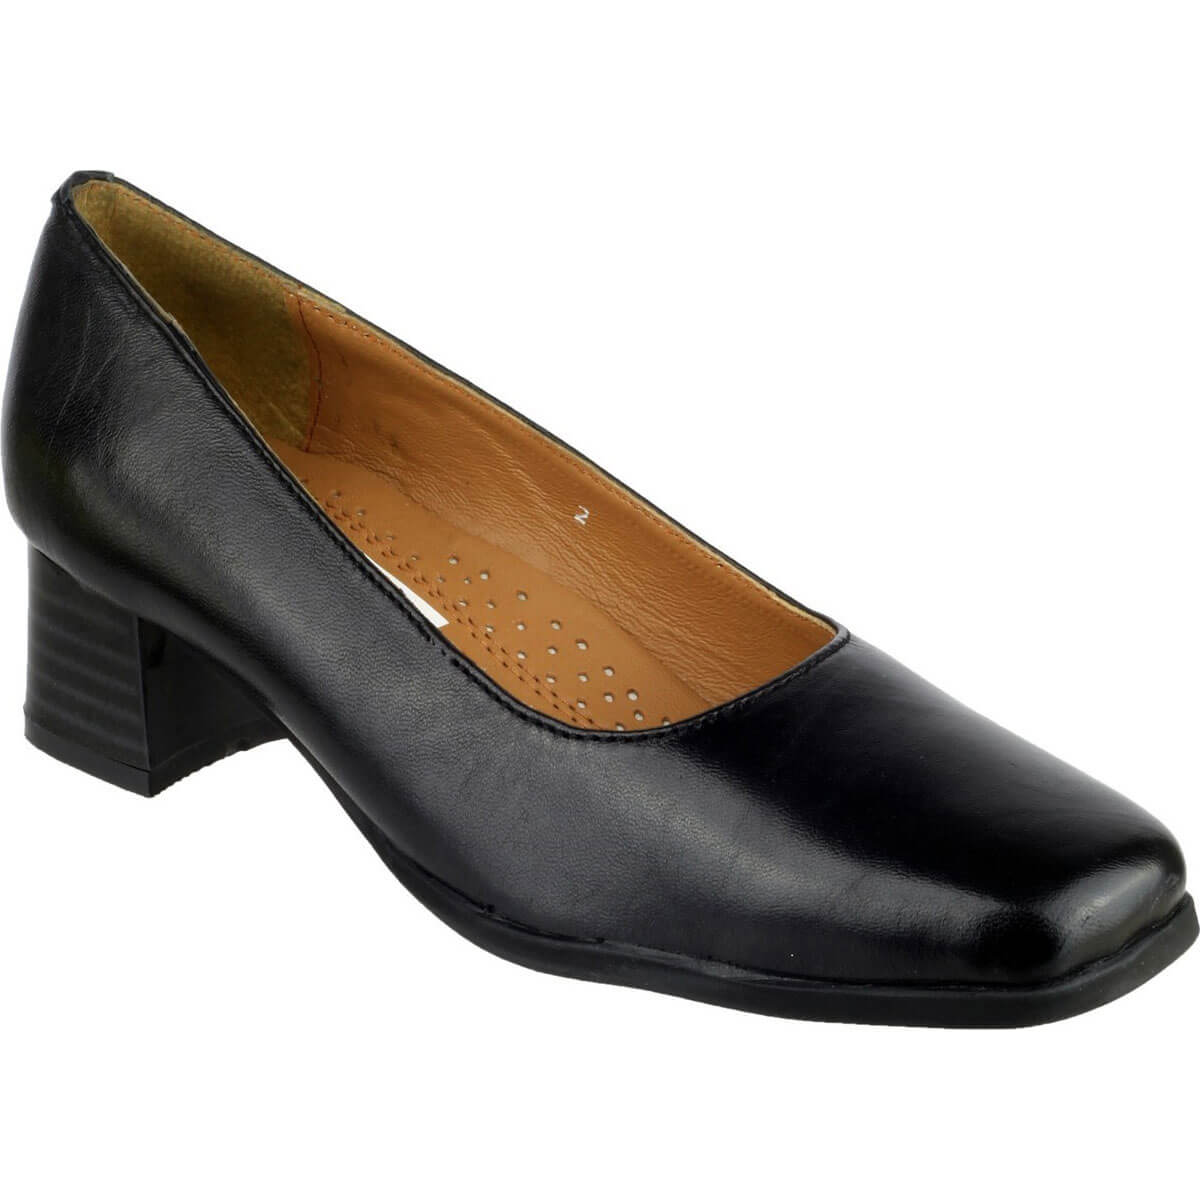 Image of Amblers Walford Ladies Shoes Leather Court Black Size 8